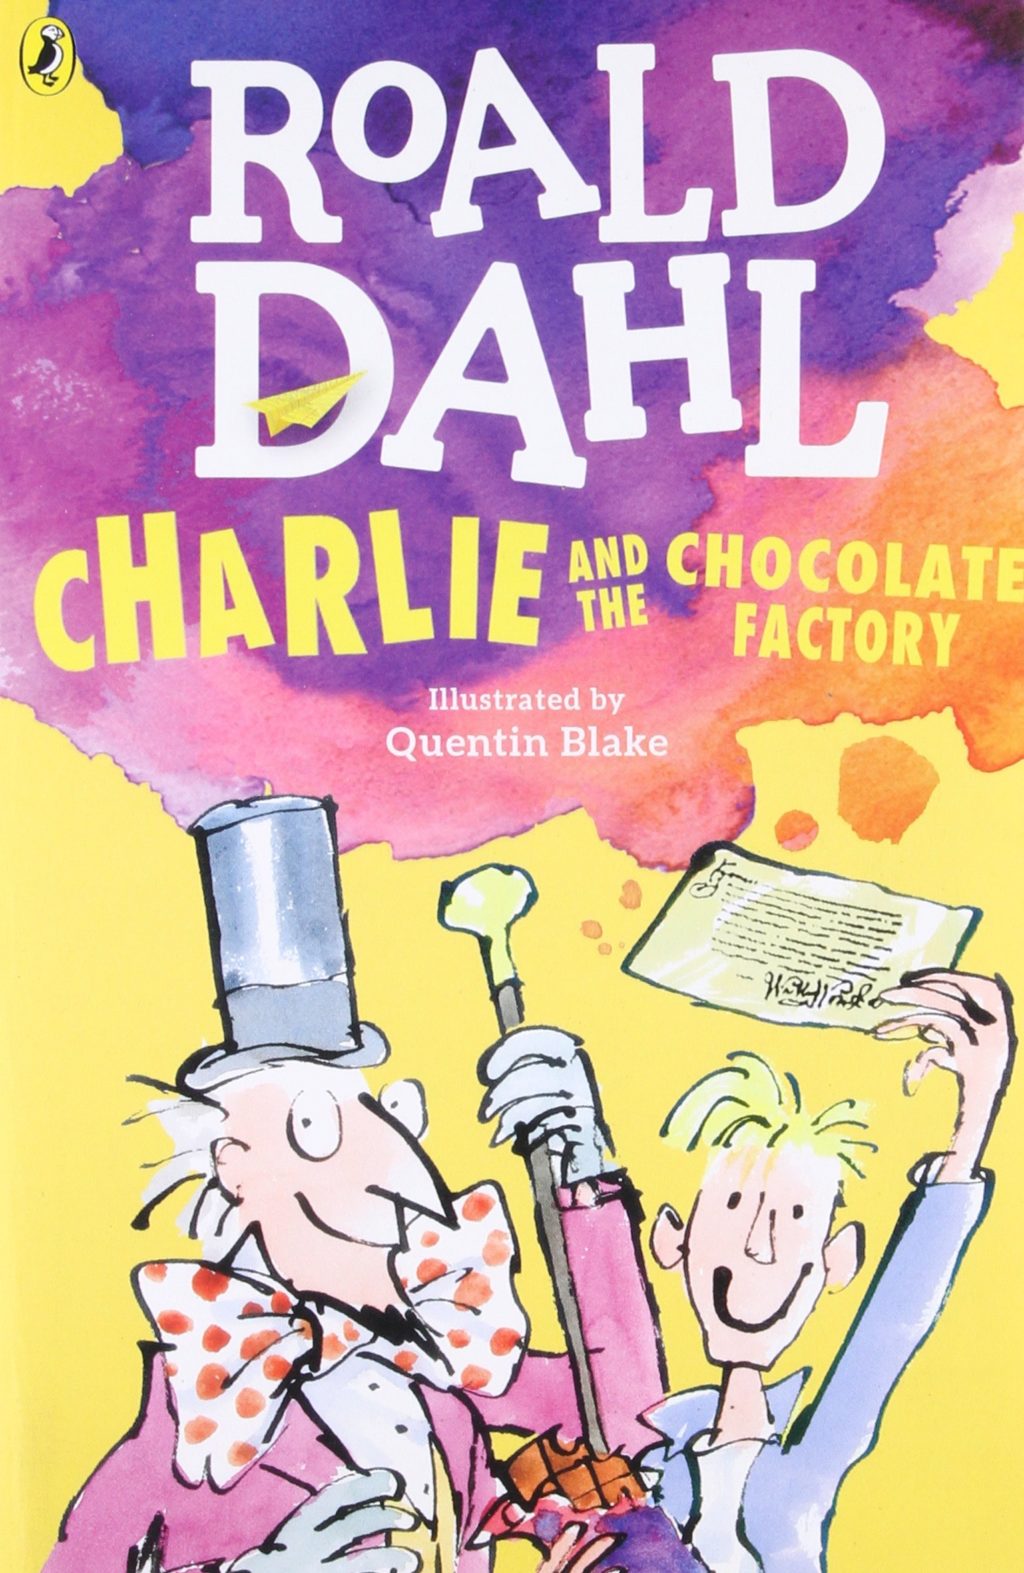 Charlie and the Chocolate Factory Roald Dahl Jokes From Kids' Books